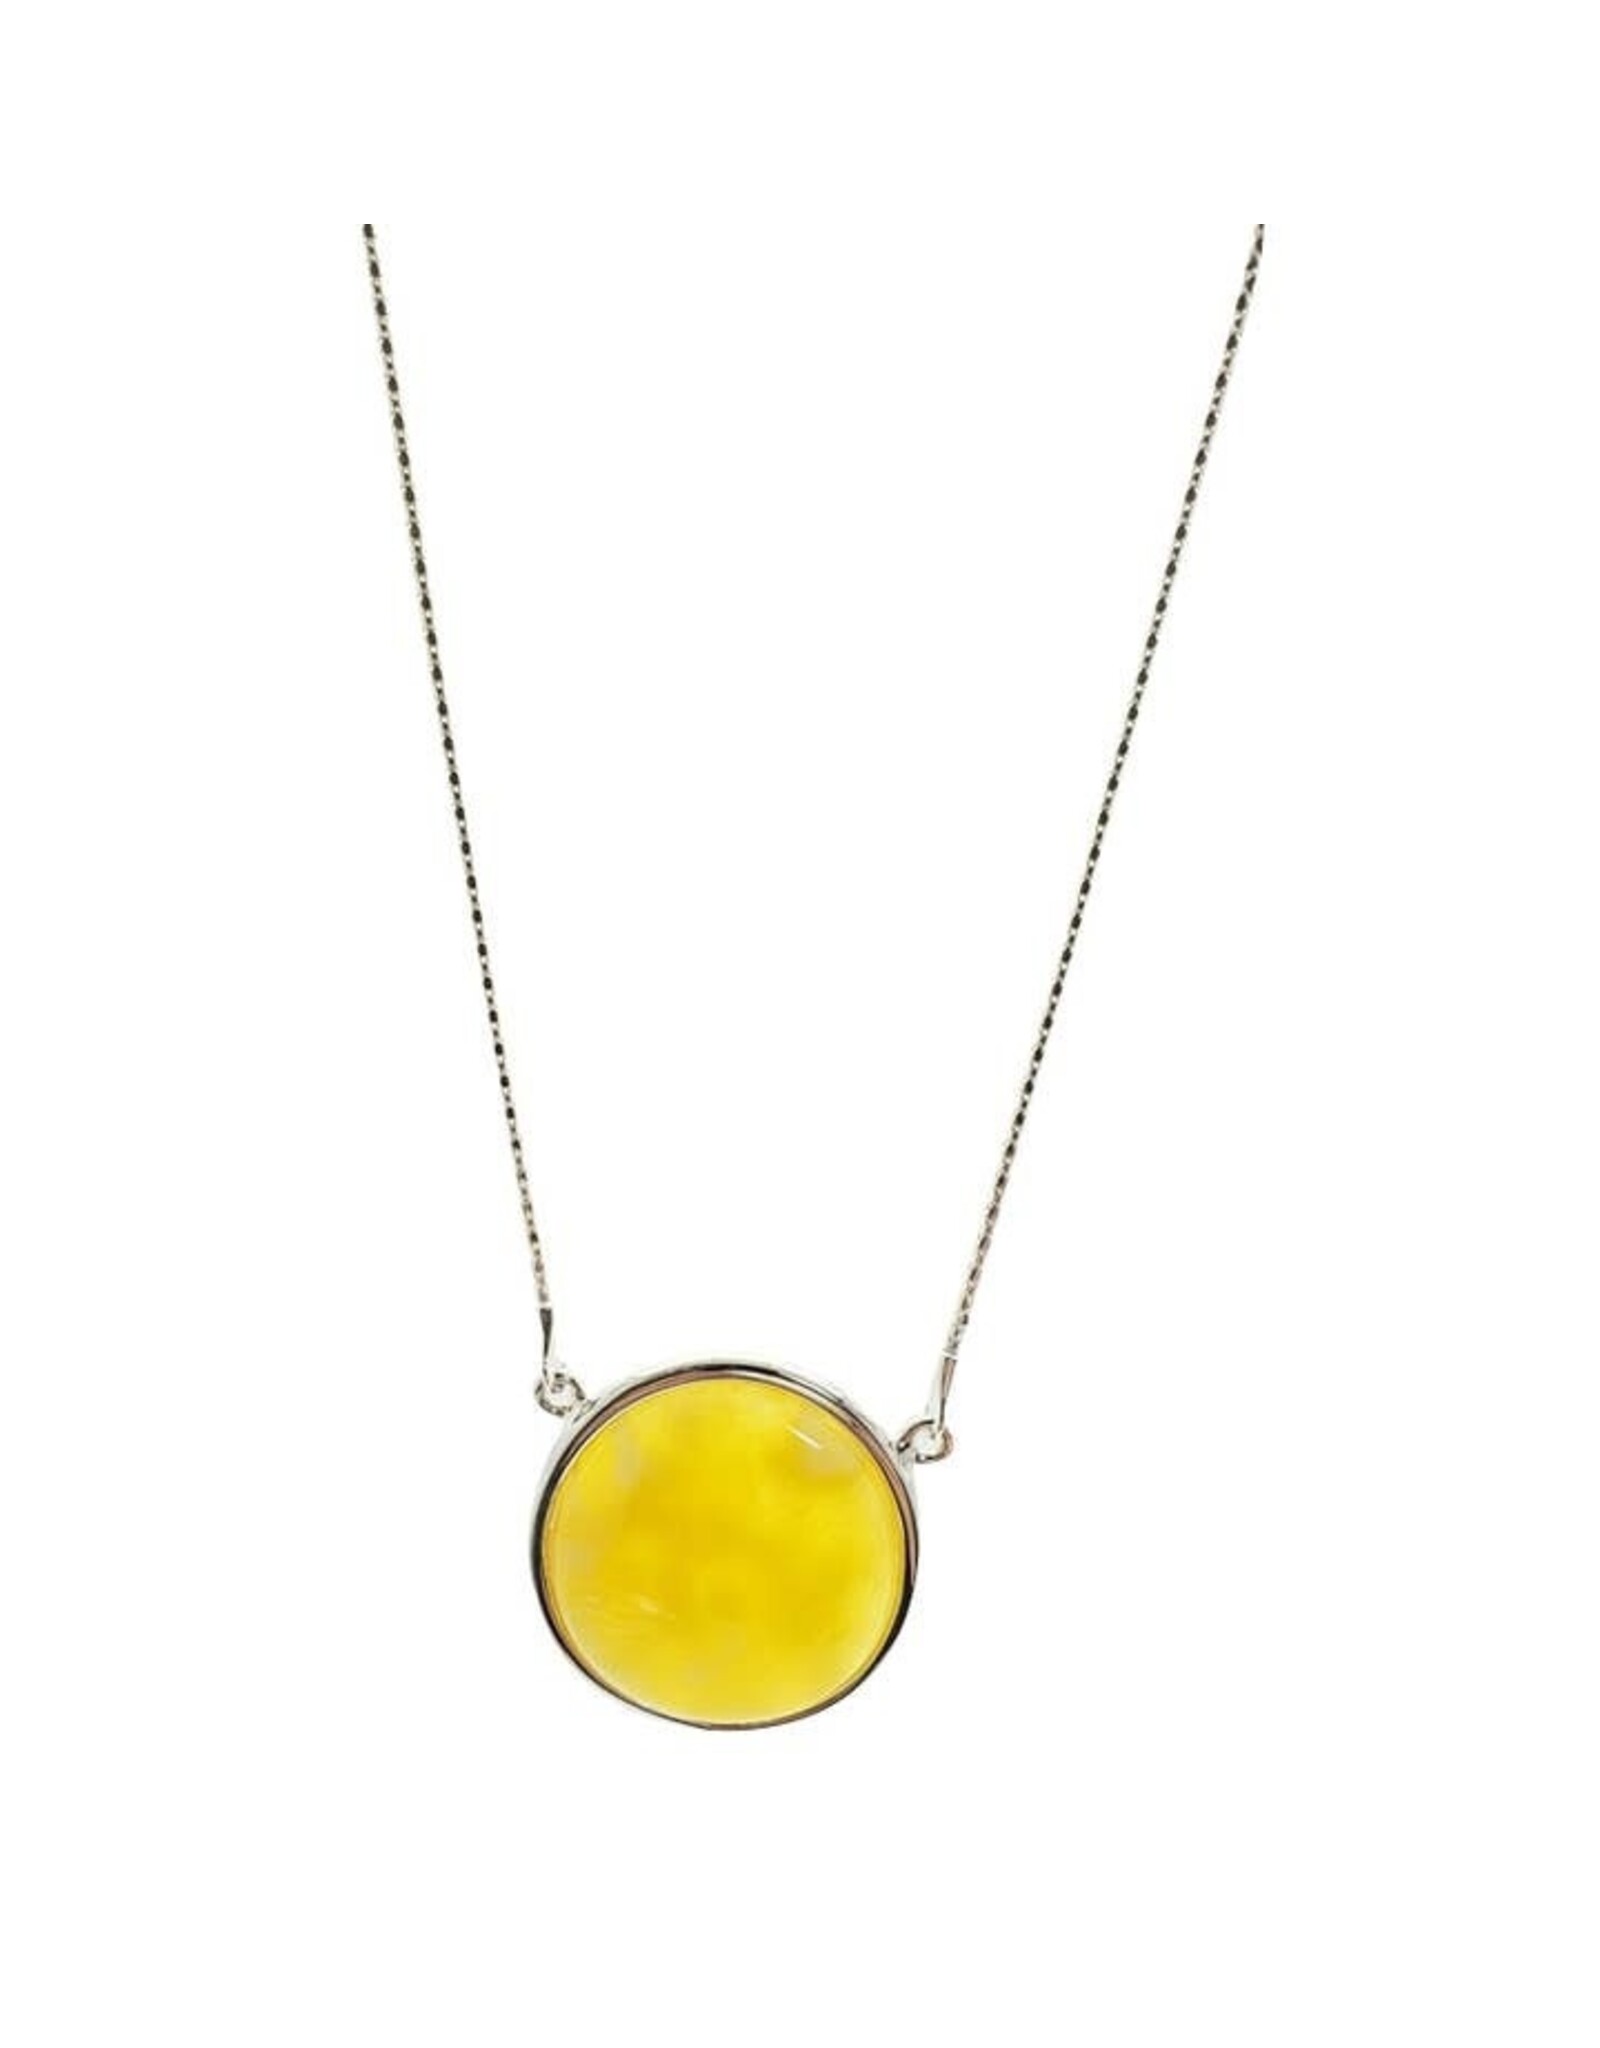 Butterscotch Amber Pendant in 925 Sterling Silver Necklace